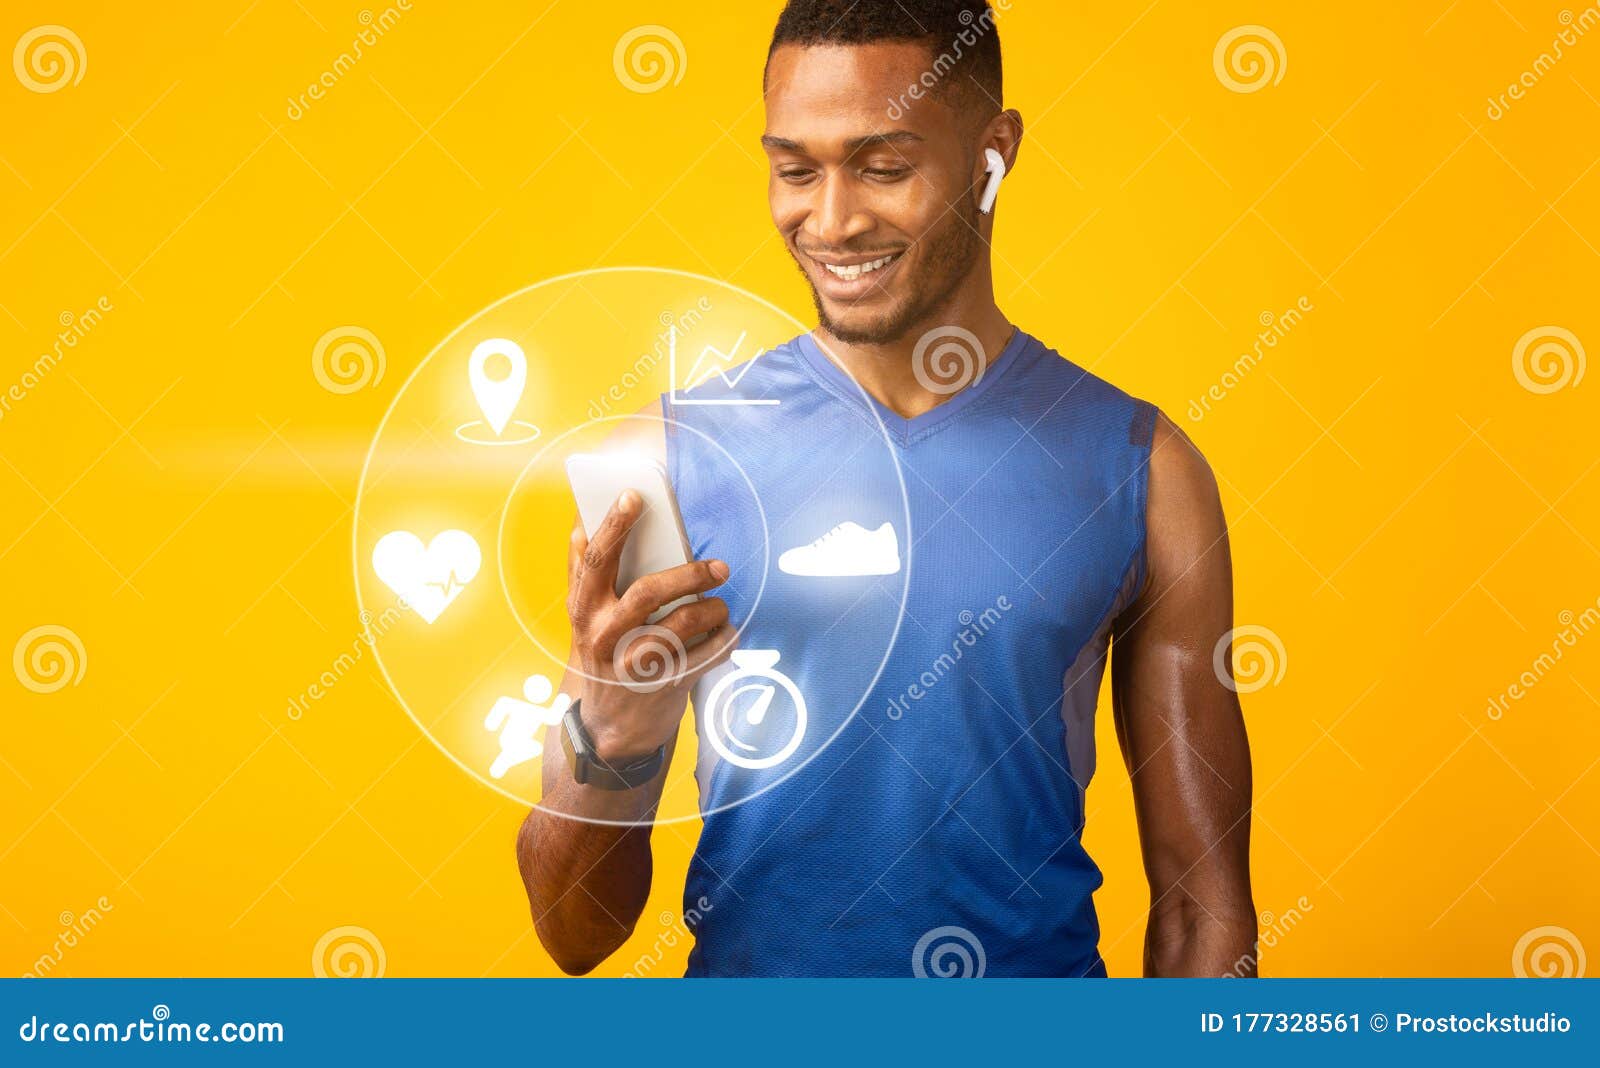 Young Woman Athlete Using Cell Phone At Gym. Stock Image 